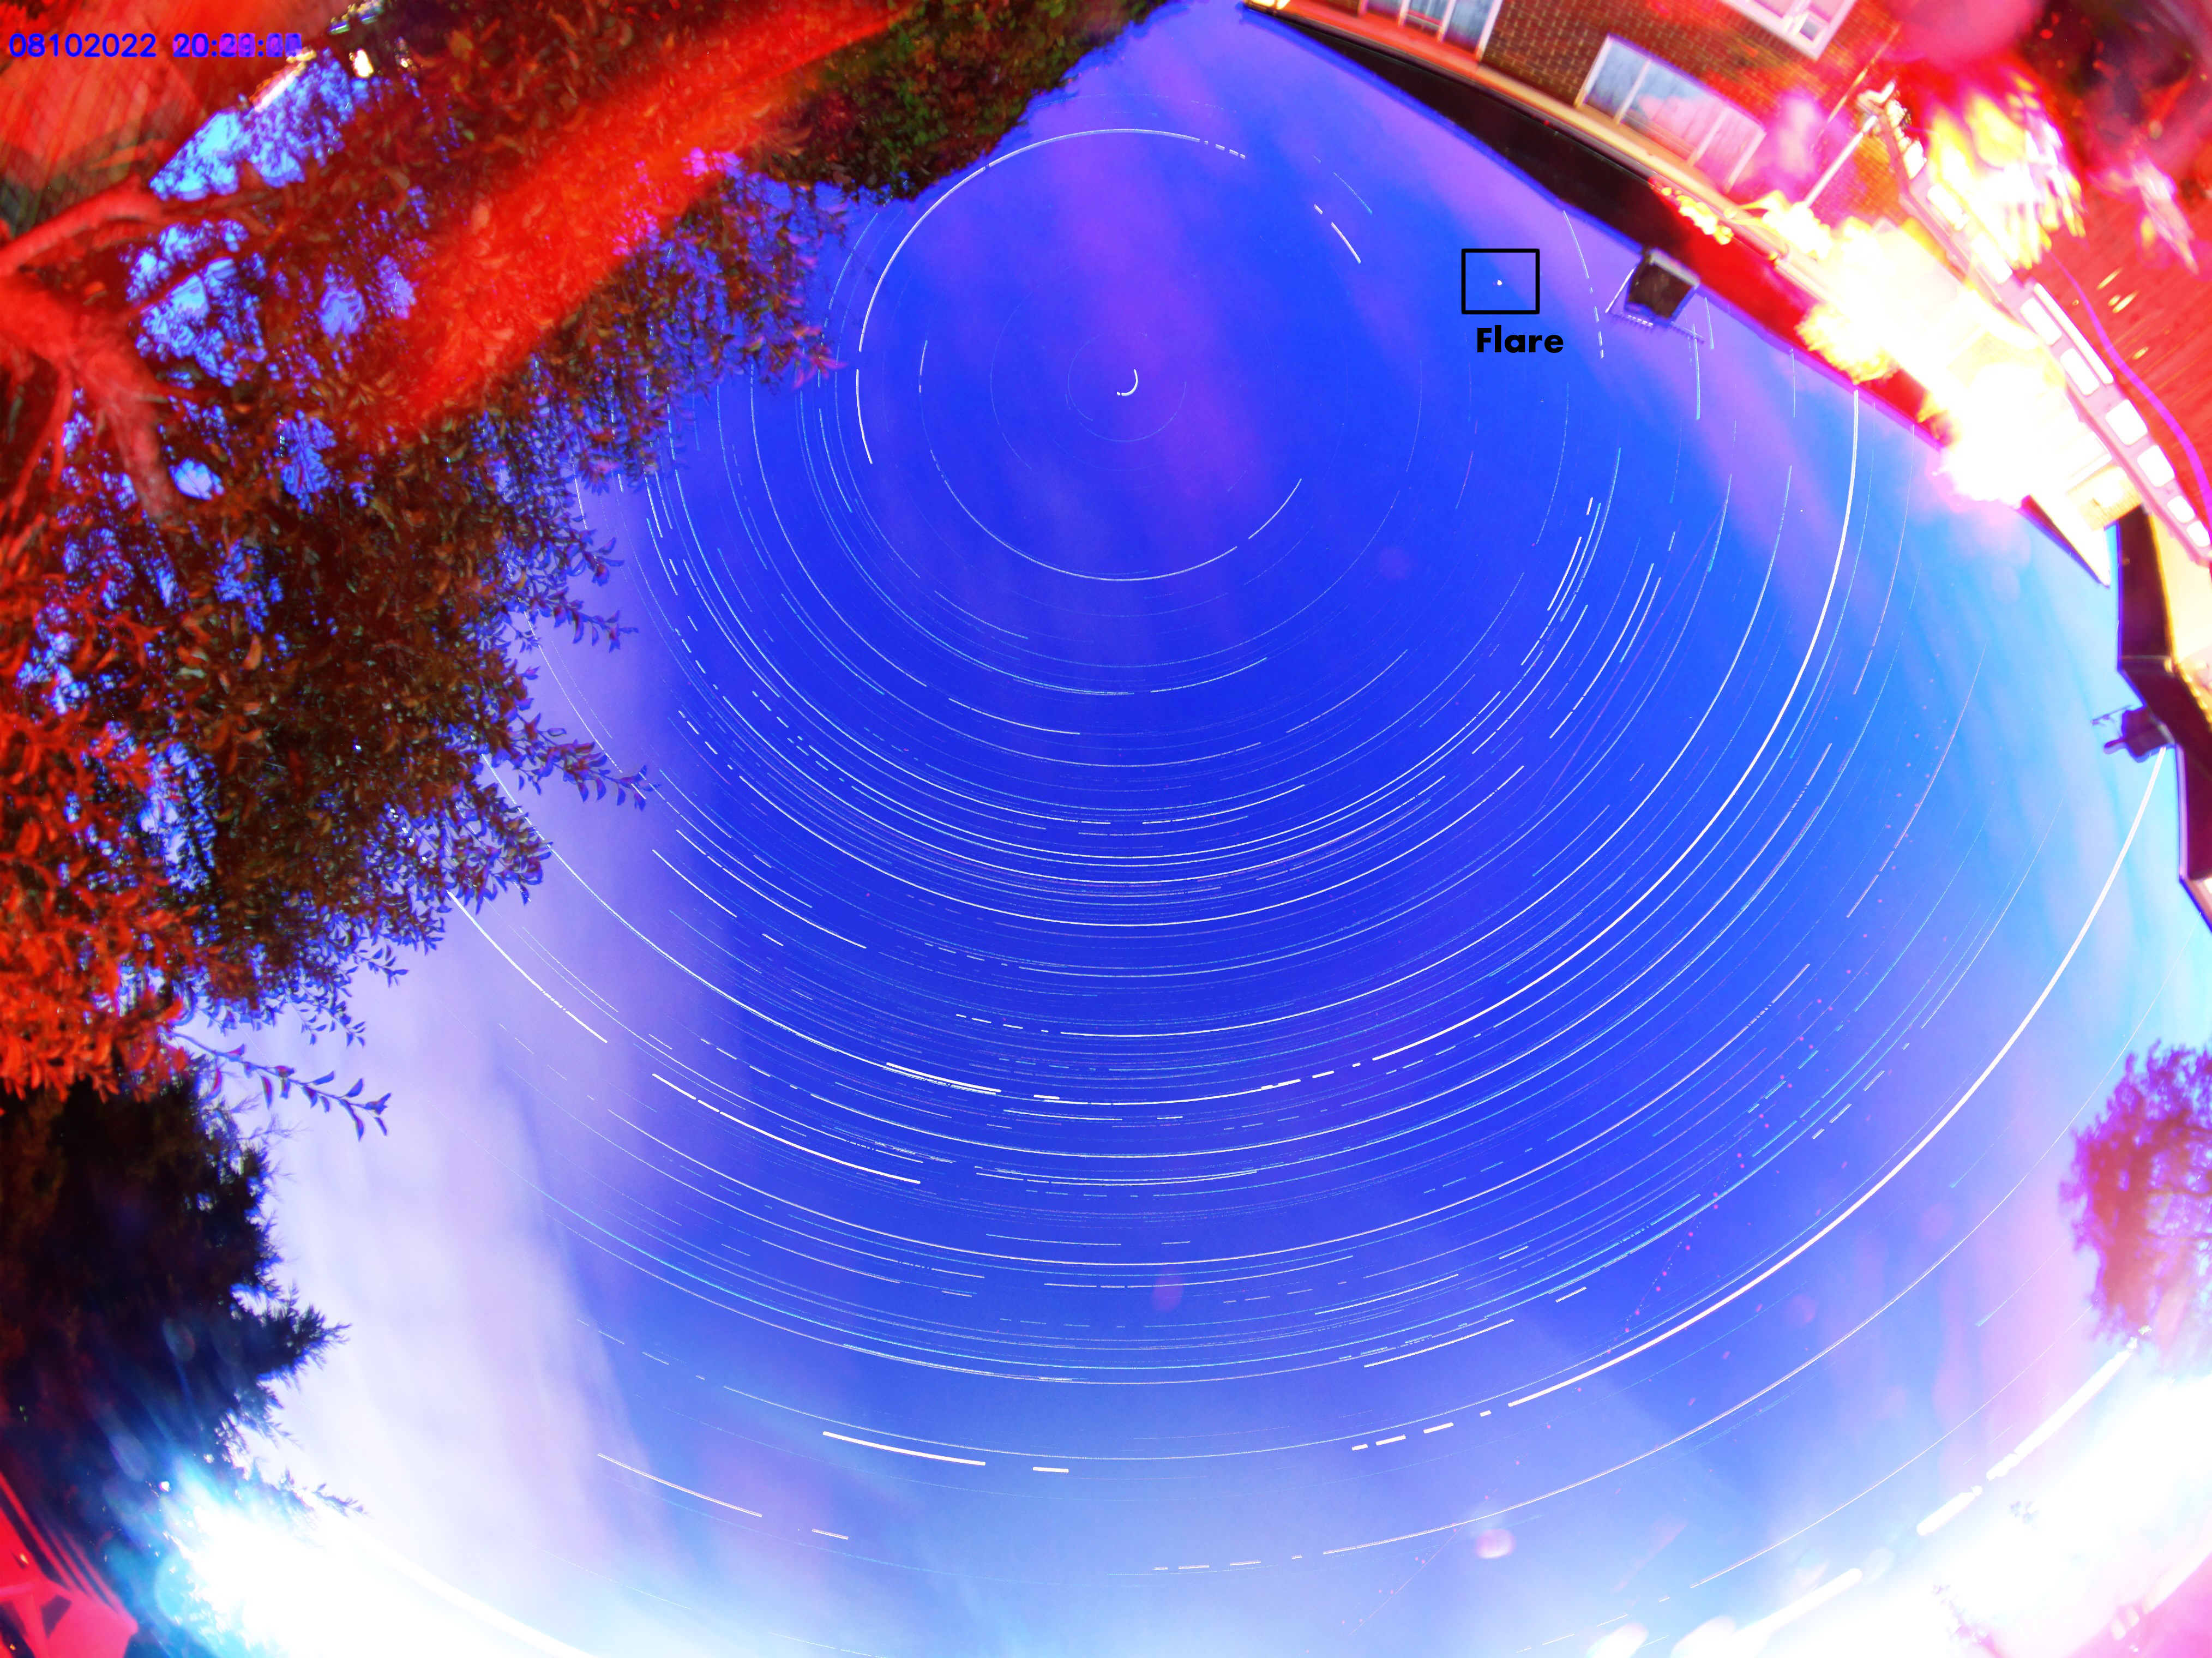 star trails 8-10-22 annotated low res.jpg